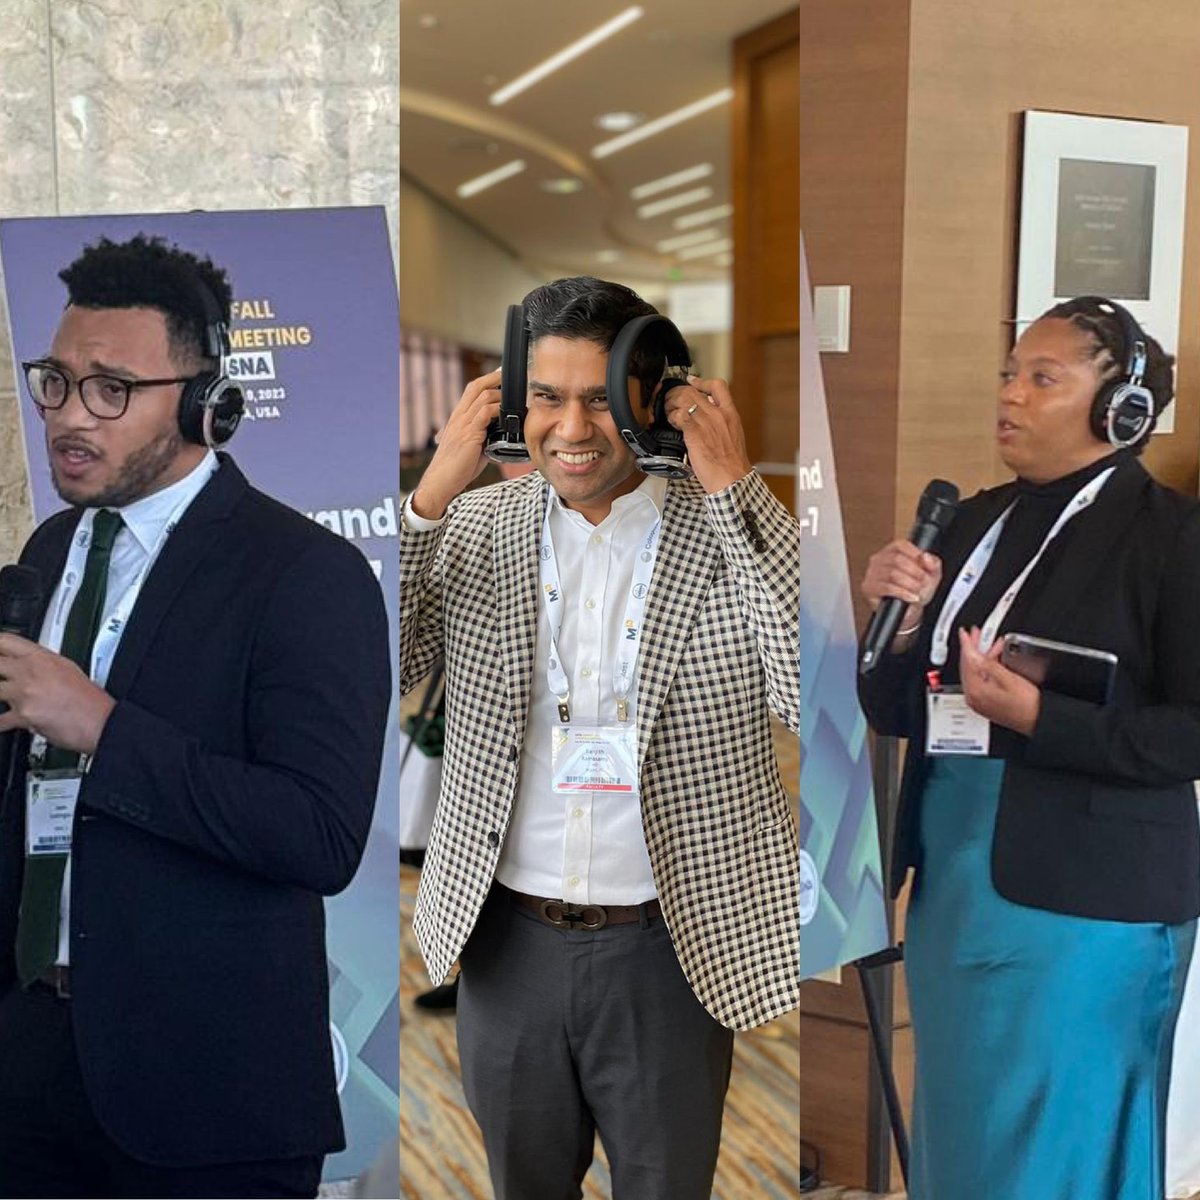 That’s a wrap for #SMSNA23 Thankful to both contribute to and engage in the discourse over the weekend. @ranjithramamd @aymaraevans @alexvarnum24 @dvelasquezhid